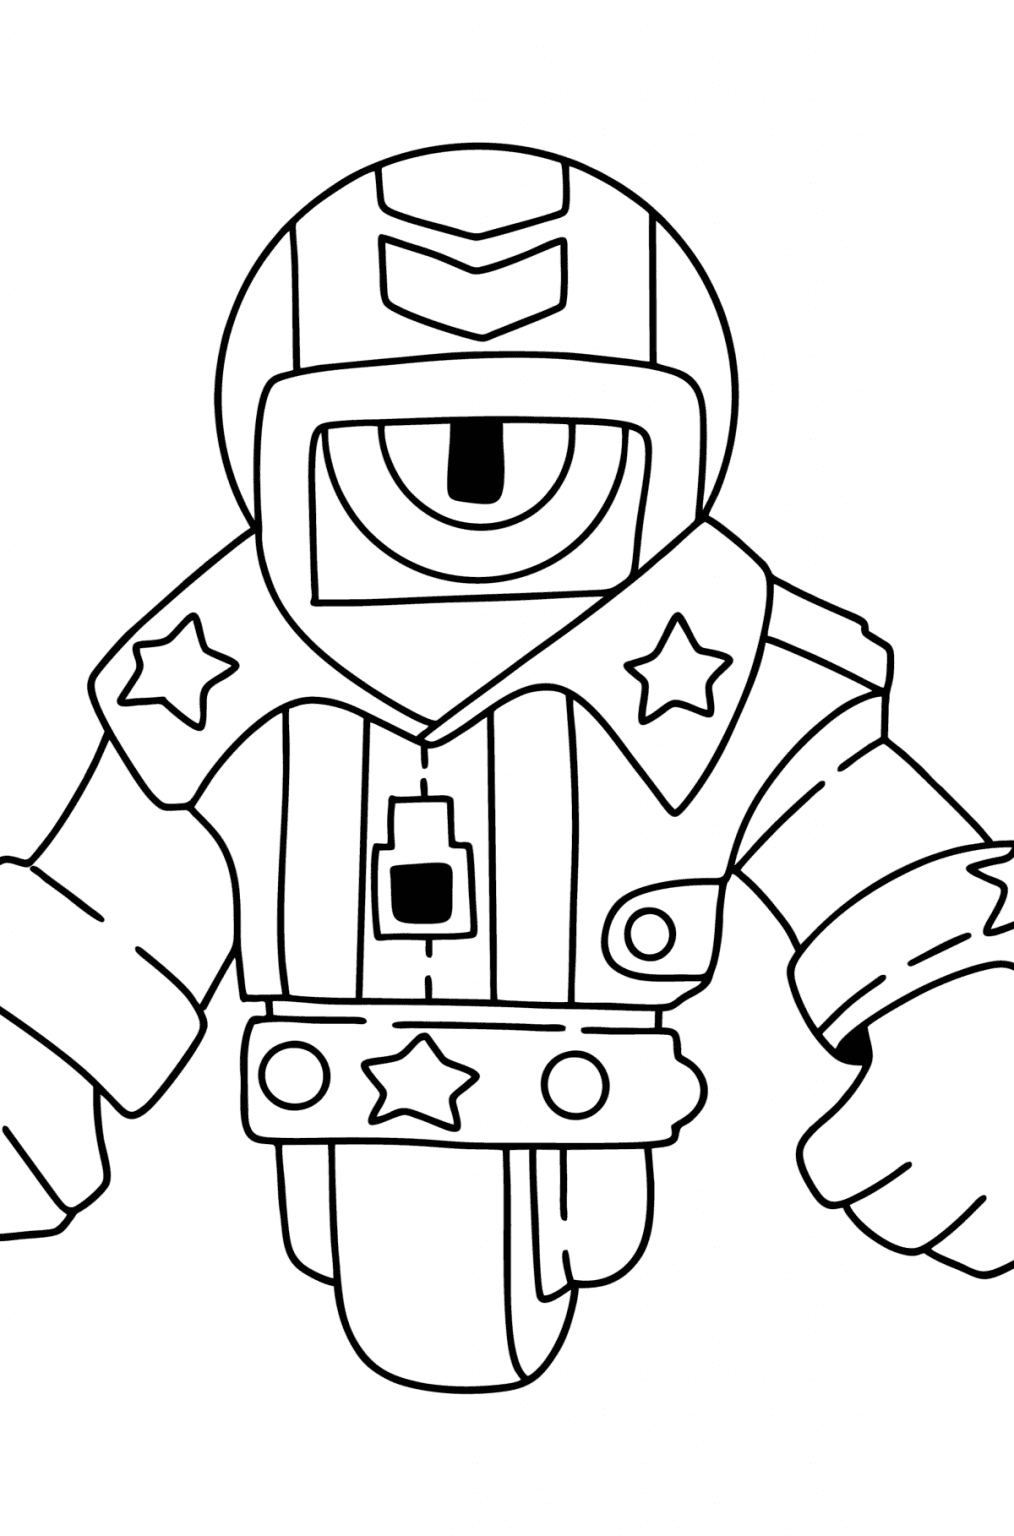 Brawl Stars coloring pages - Download, Print, and Color Online!